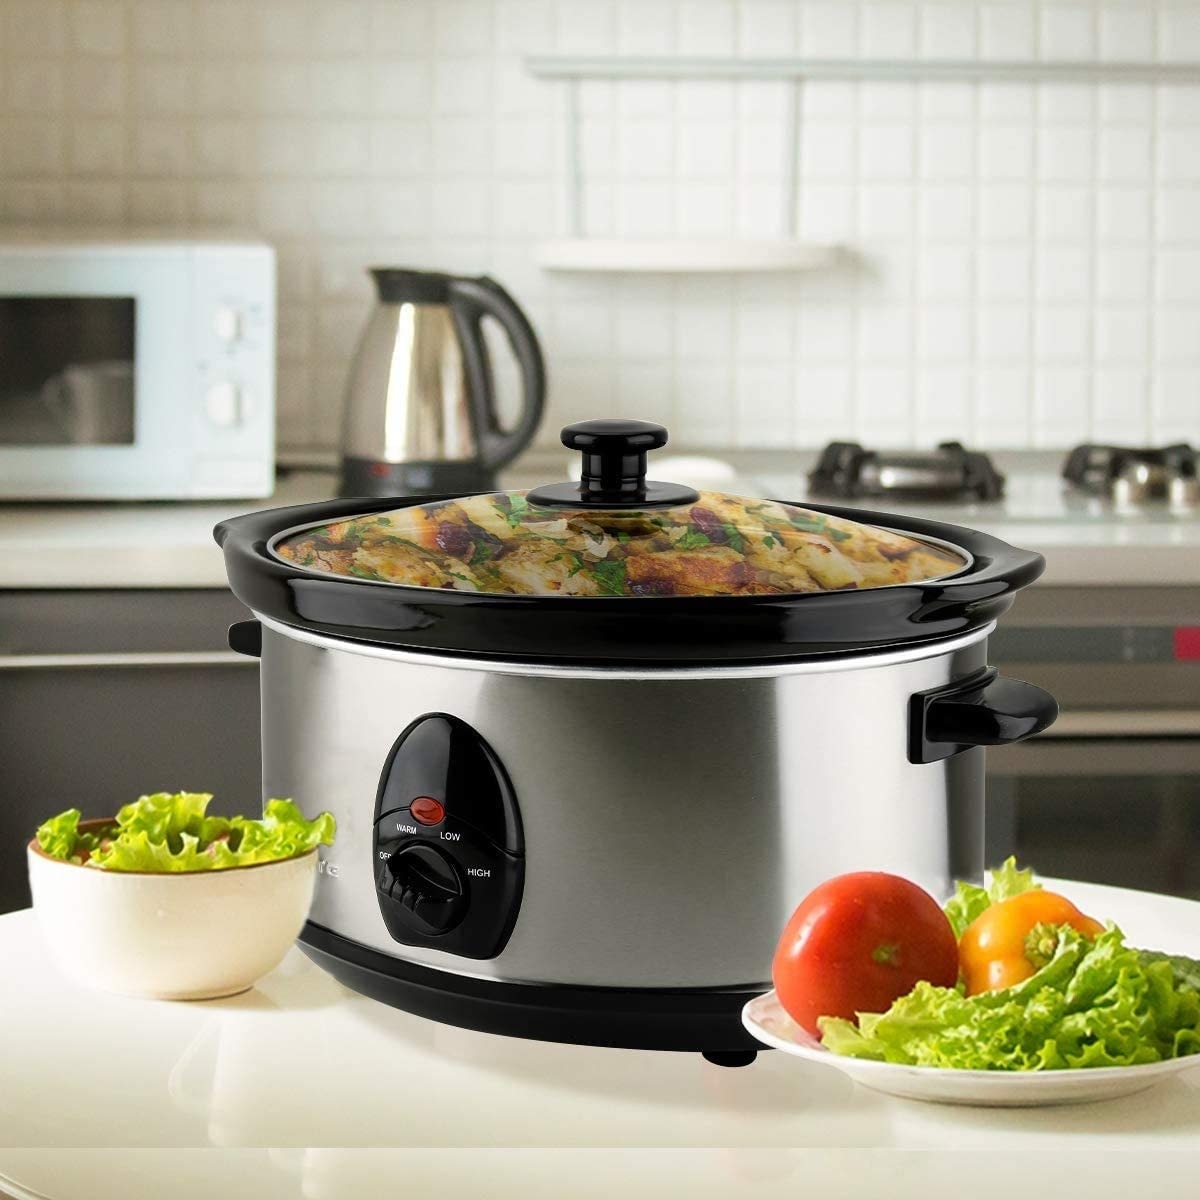 Ovente 3.7 Quart Electric Slow Cooker with Removable Ceramic Pot